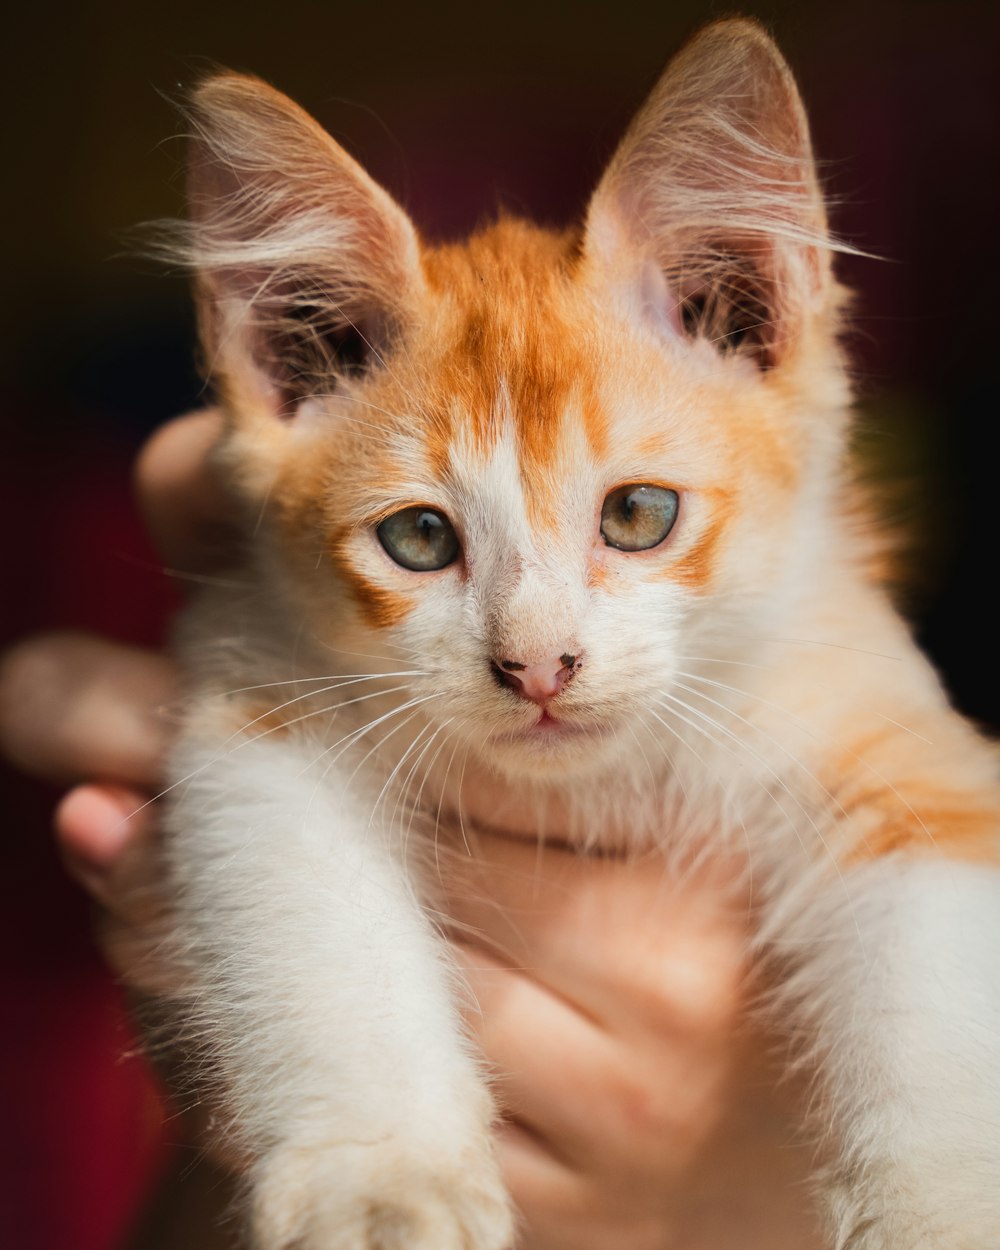 a small orange and white kitten being held by a person